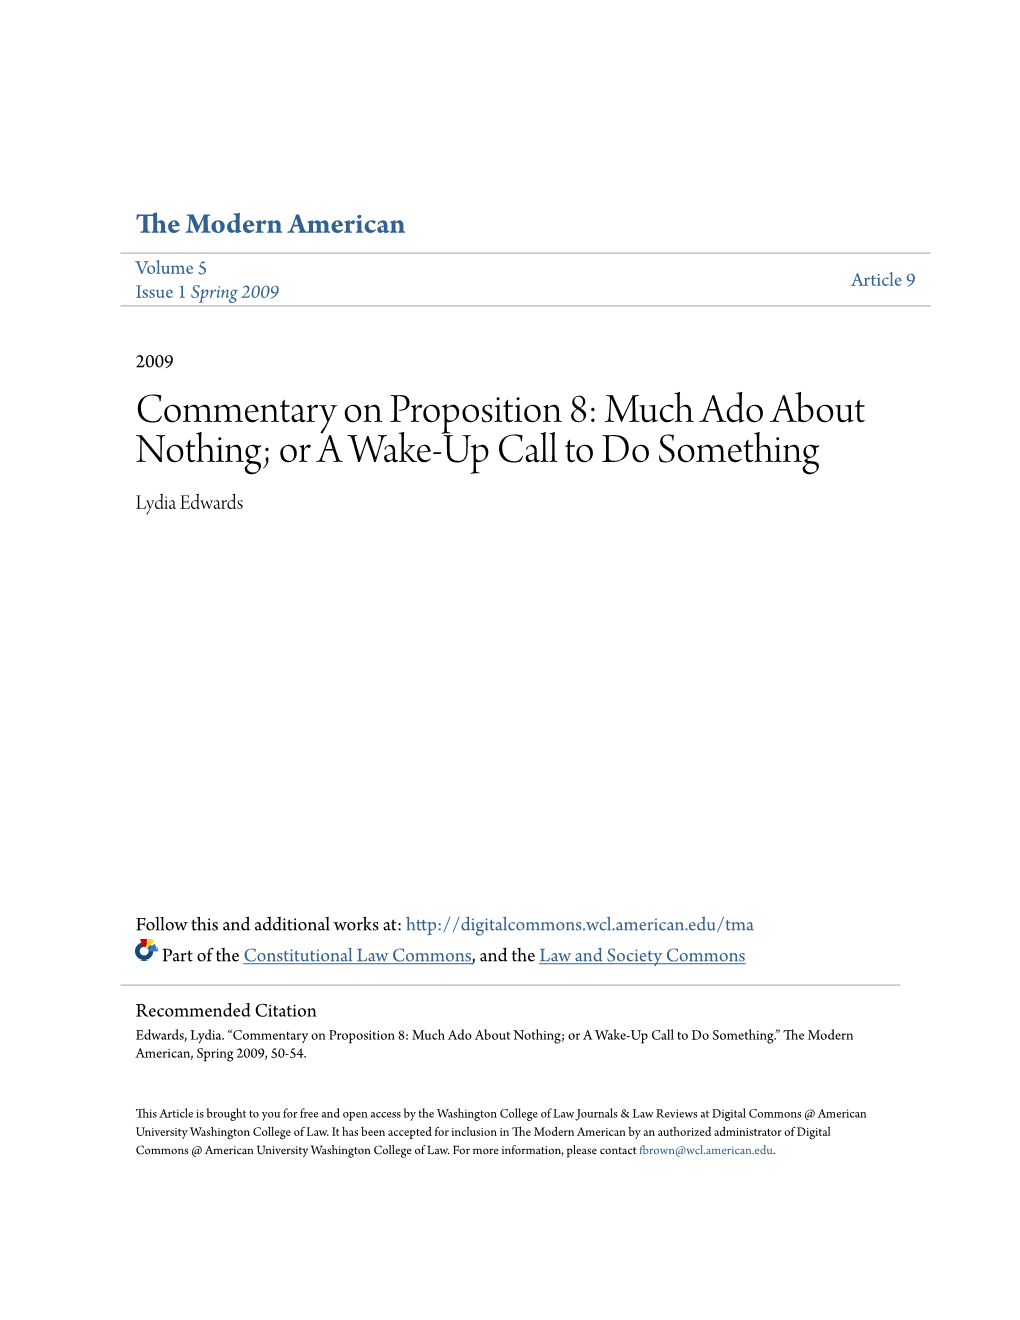 Commentary on Proposition 8: Much Ado About Nothing; Or a Wake-Up Call to Do Something Lydia Edwards